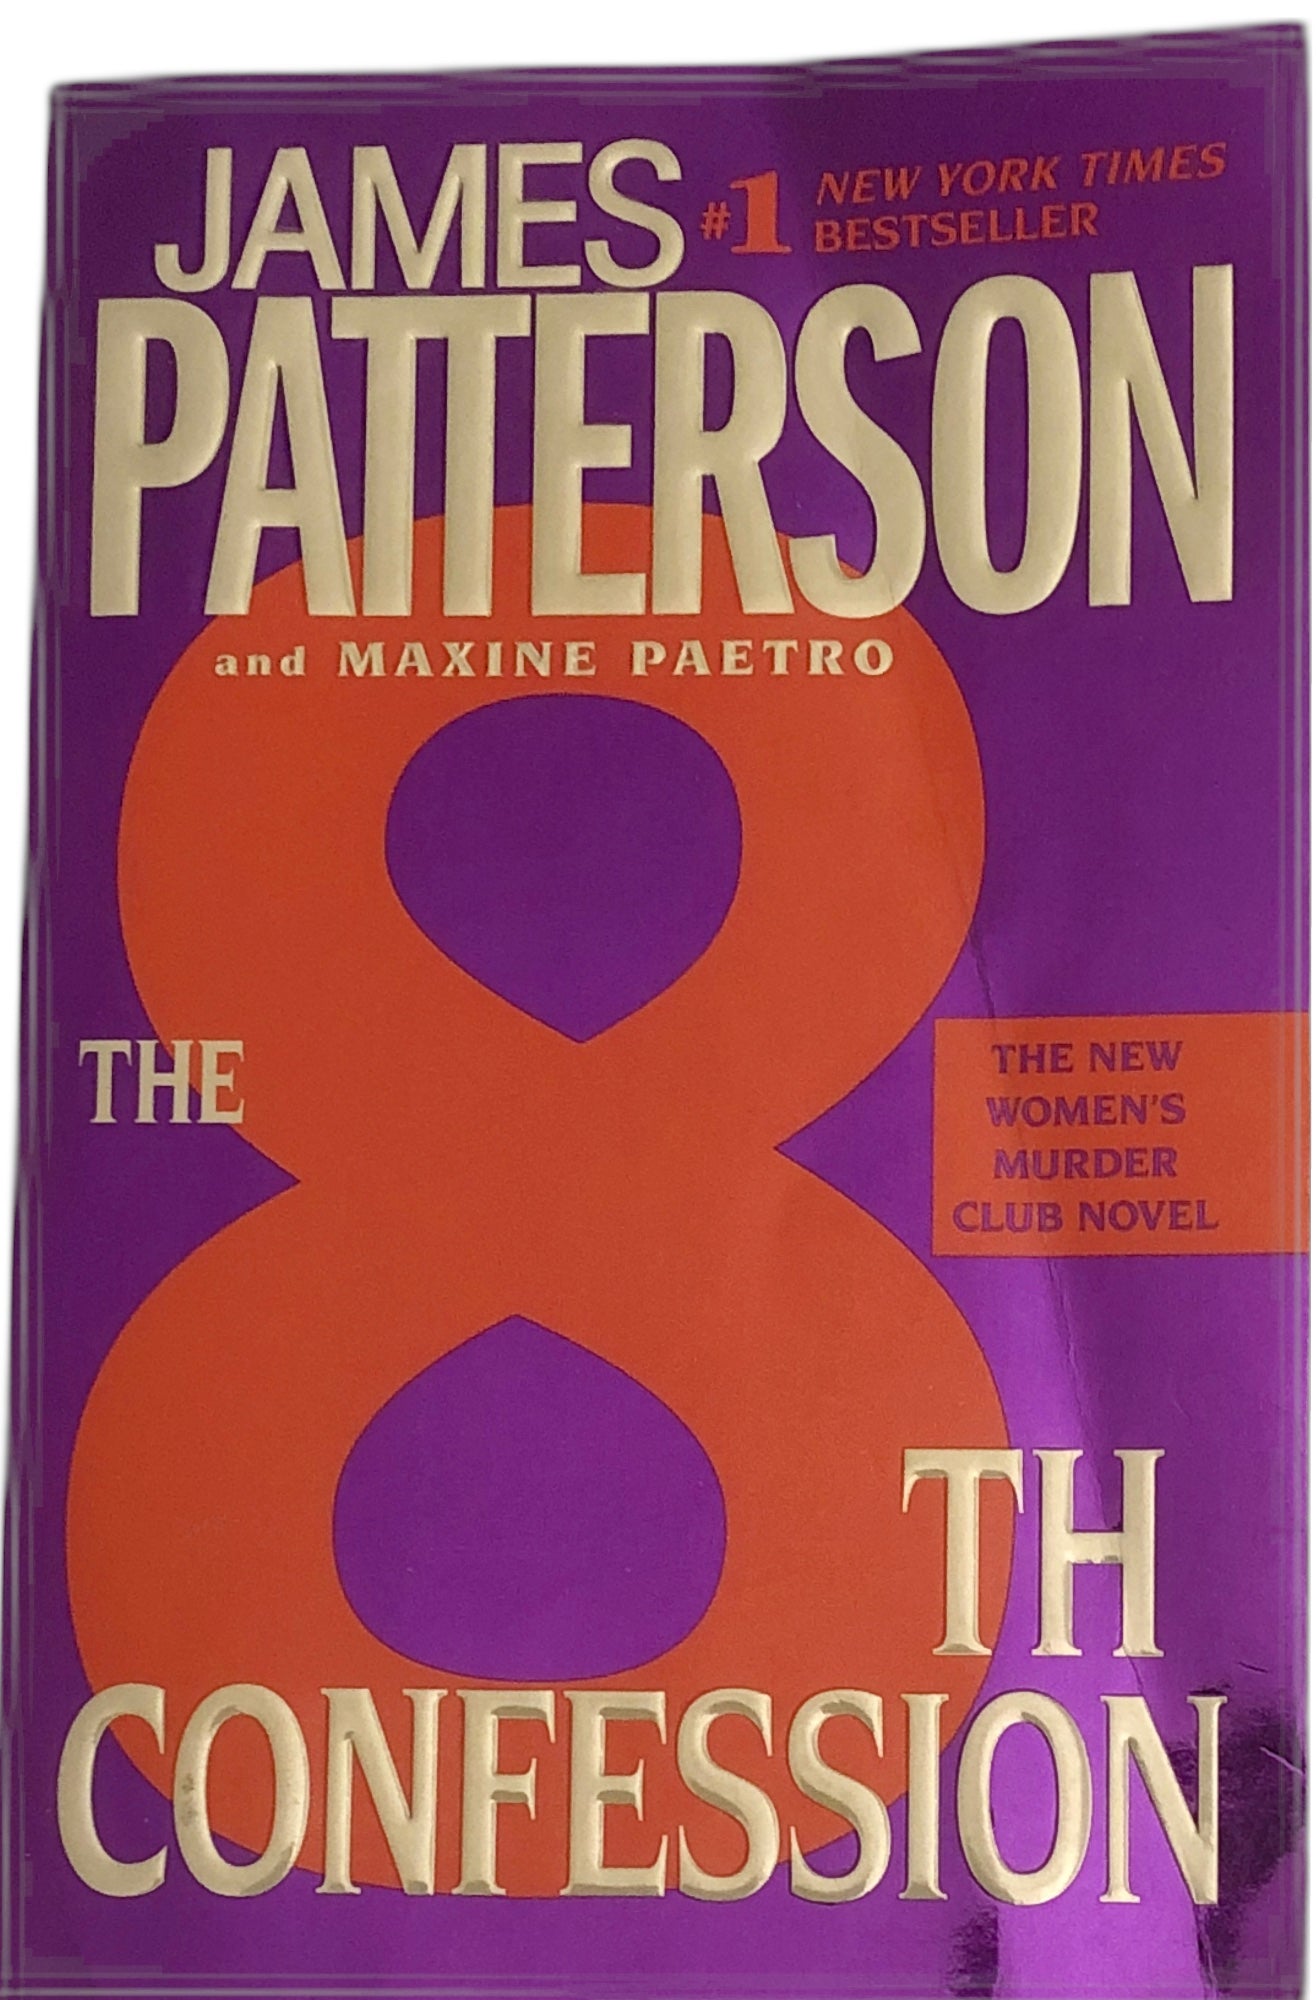 The 8th Confession by James Patterson & Maxine Paetro